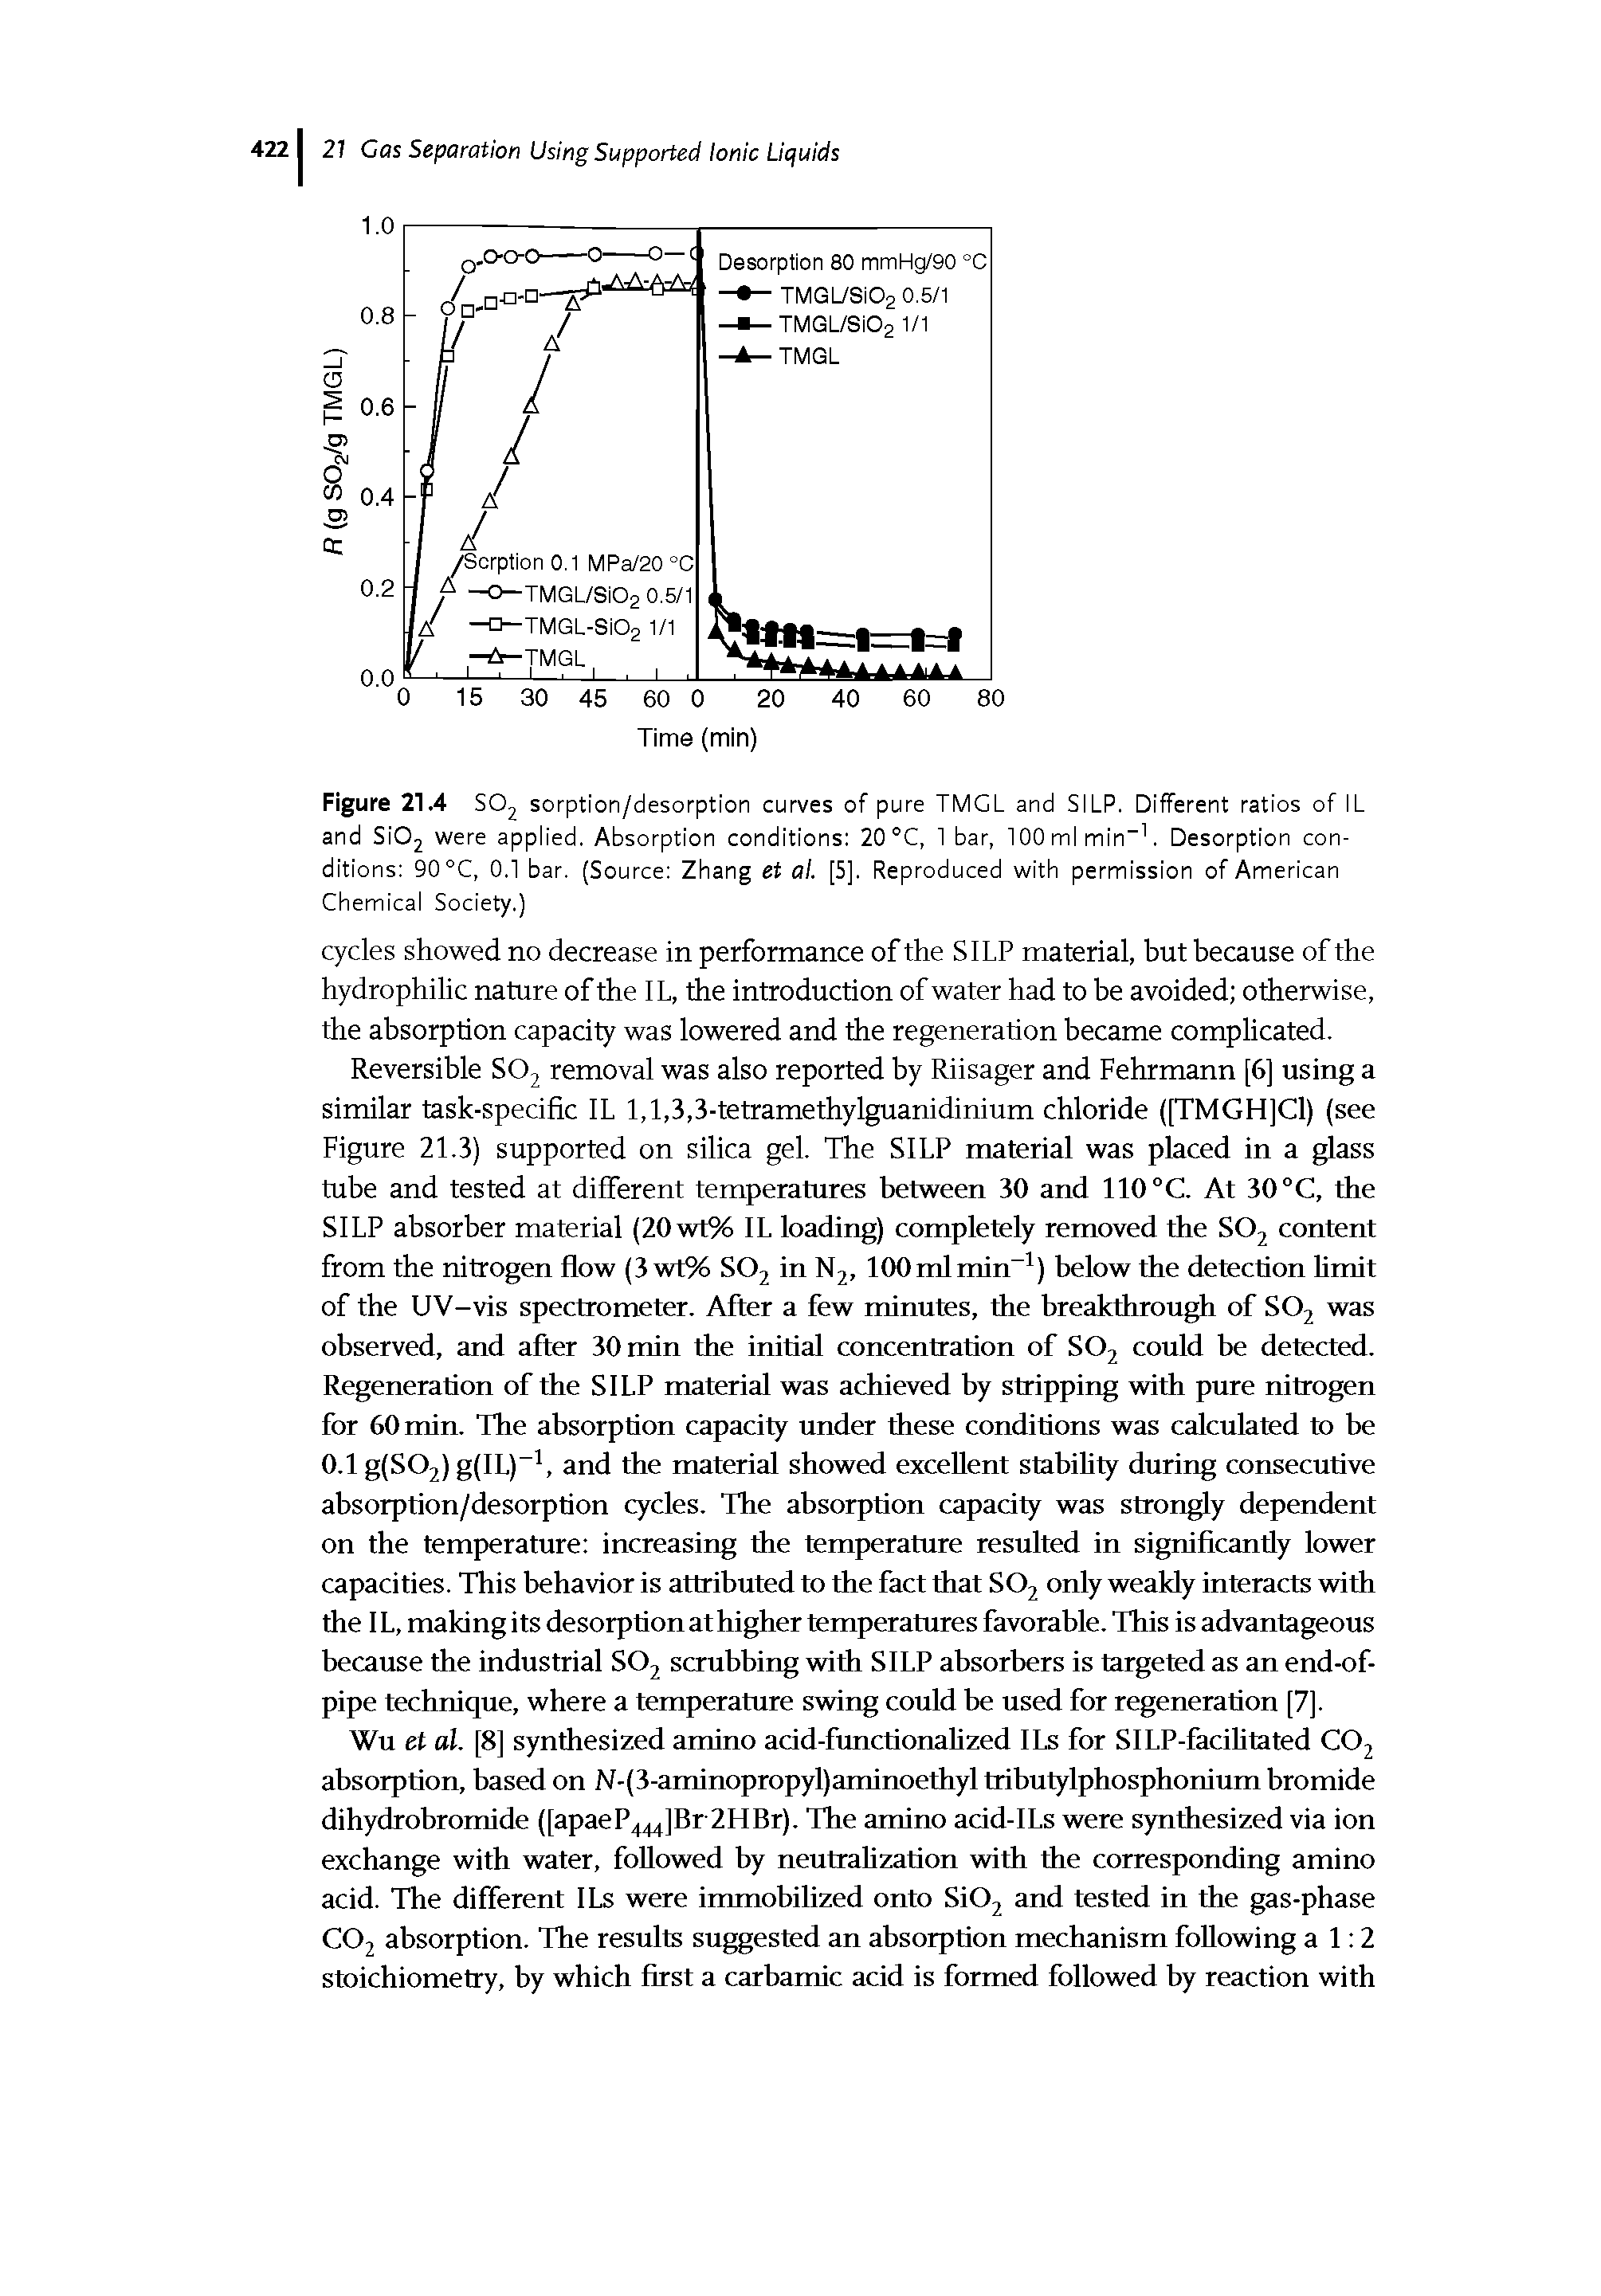 Figure 21.4 SO sorption/desorption curves of pure TMGL and SILP. Different ratios of IL and SiOj were applied. Absorption conditions 20 °C, 1 bar, 100 ml min". Desorption conditions 90 °C, 0.1 bar. (Source Zhang et al. [5]. Reproduced with permission of American Chemical Society.)...